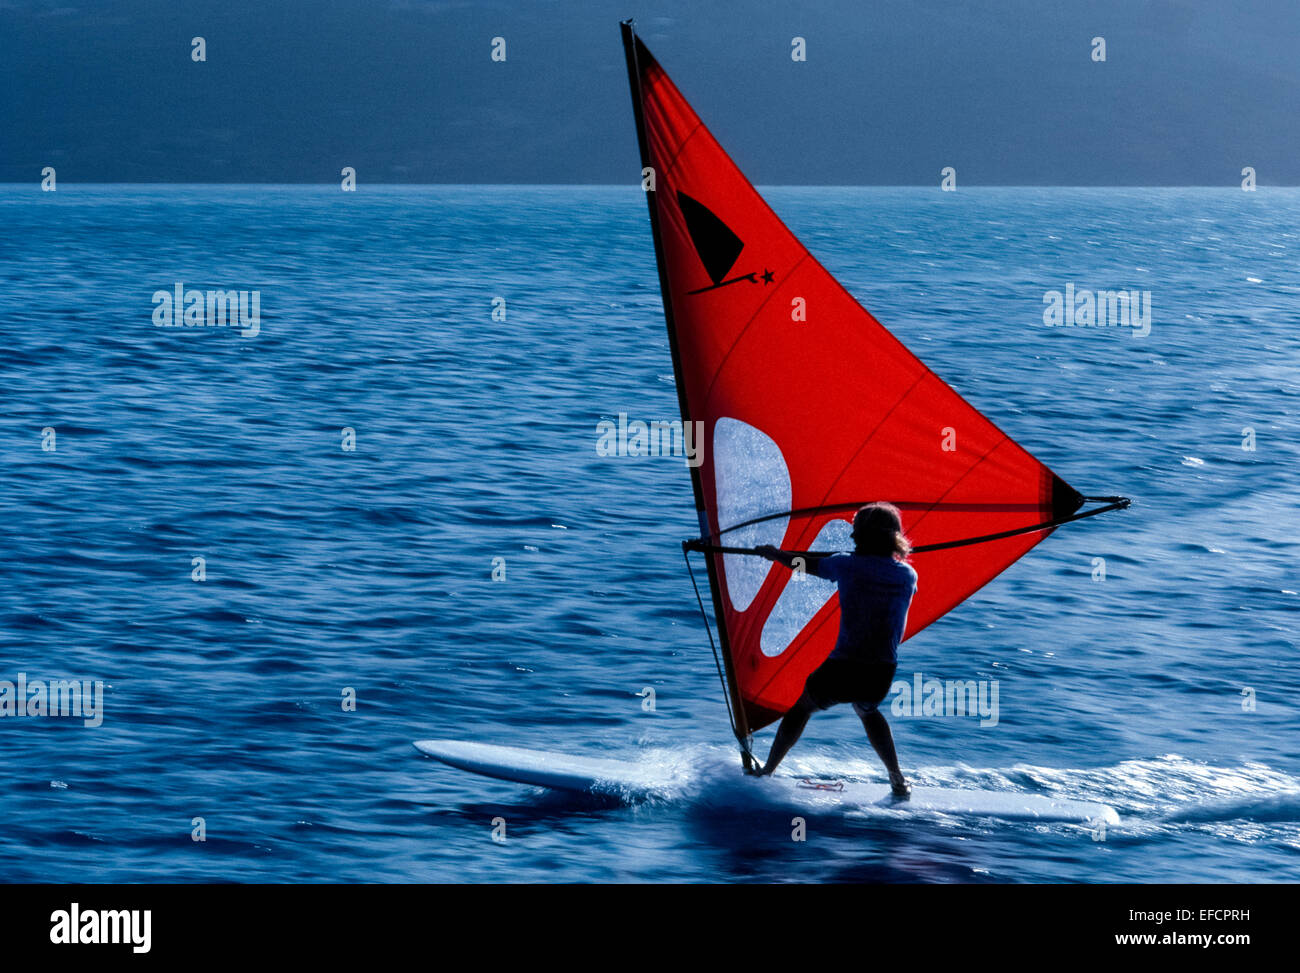 The photographer panned his camera to follow a windsurfer who is skimming over the blue ocean along the coast of Southern California, USA. Stock Photo